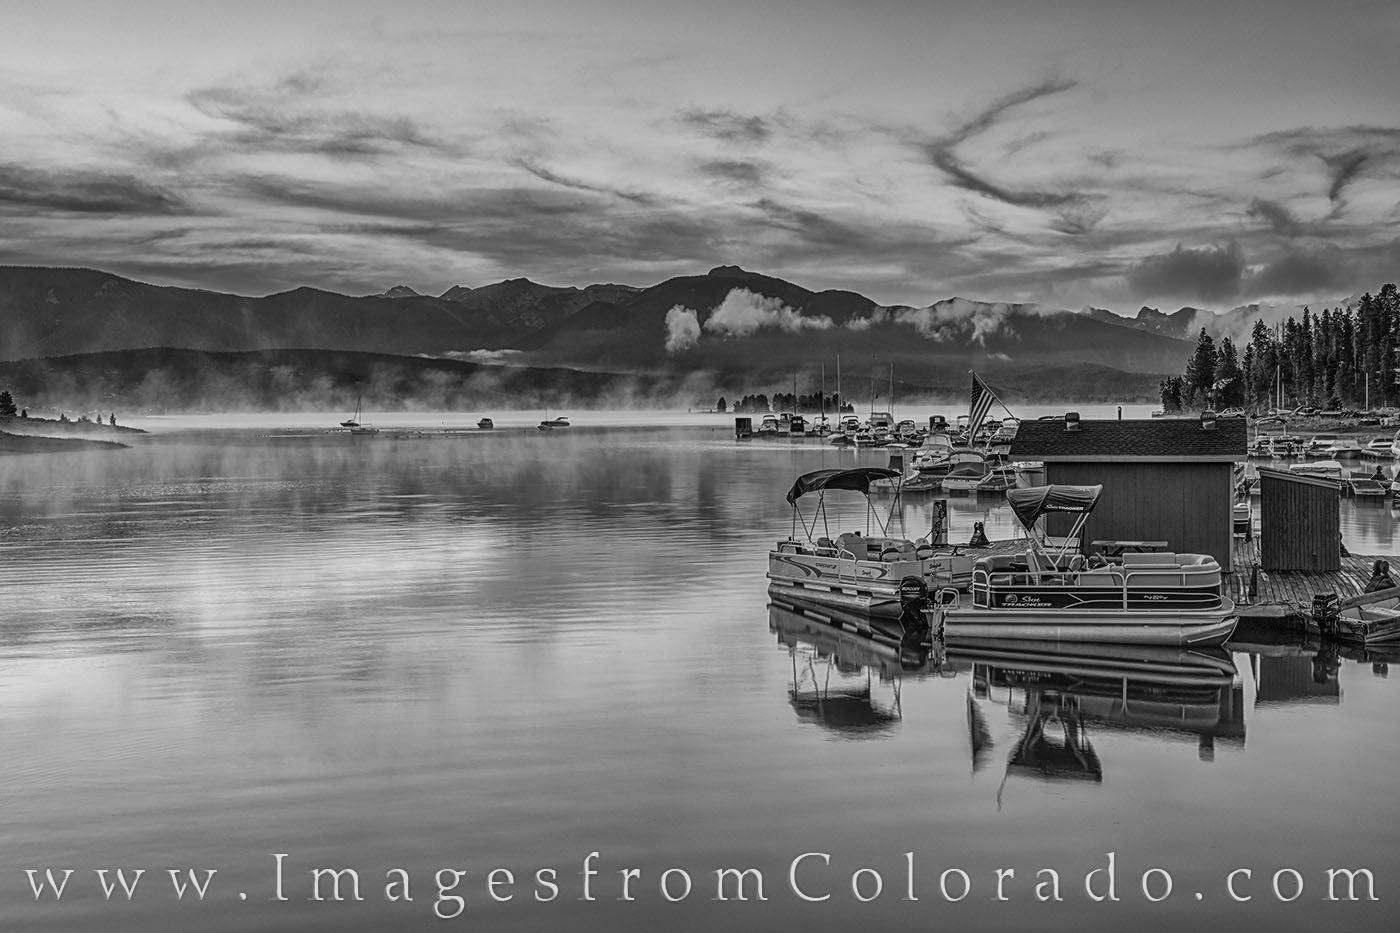 Along the shores of Lake Granby near Grand Lake, Colorado, boats rest quietly on a cold summe morning in this black and white...